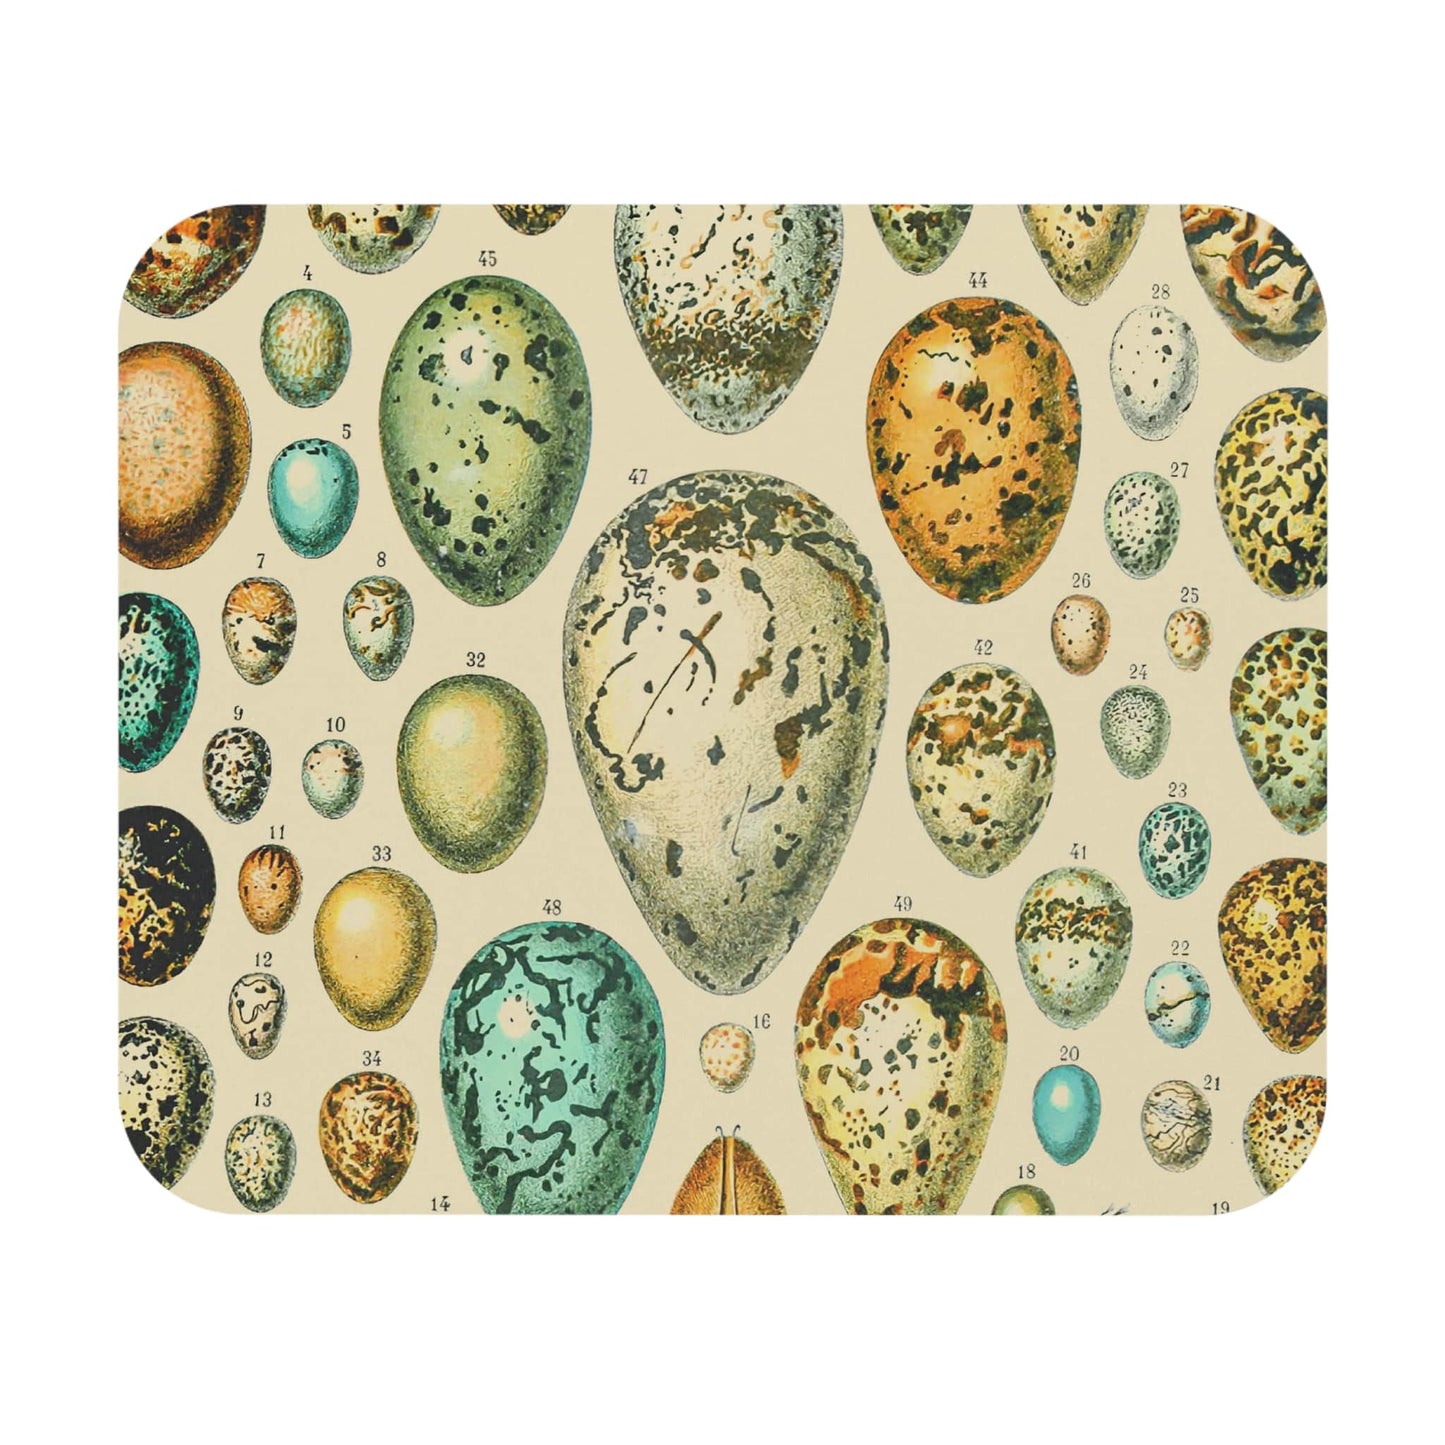 Eggs Mouse Pad featuring a vintage egg chart, adding nostalgia to desk and office decor.